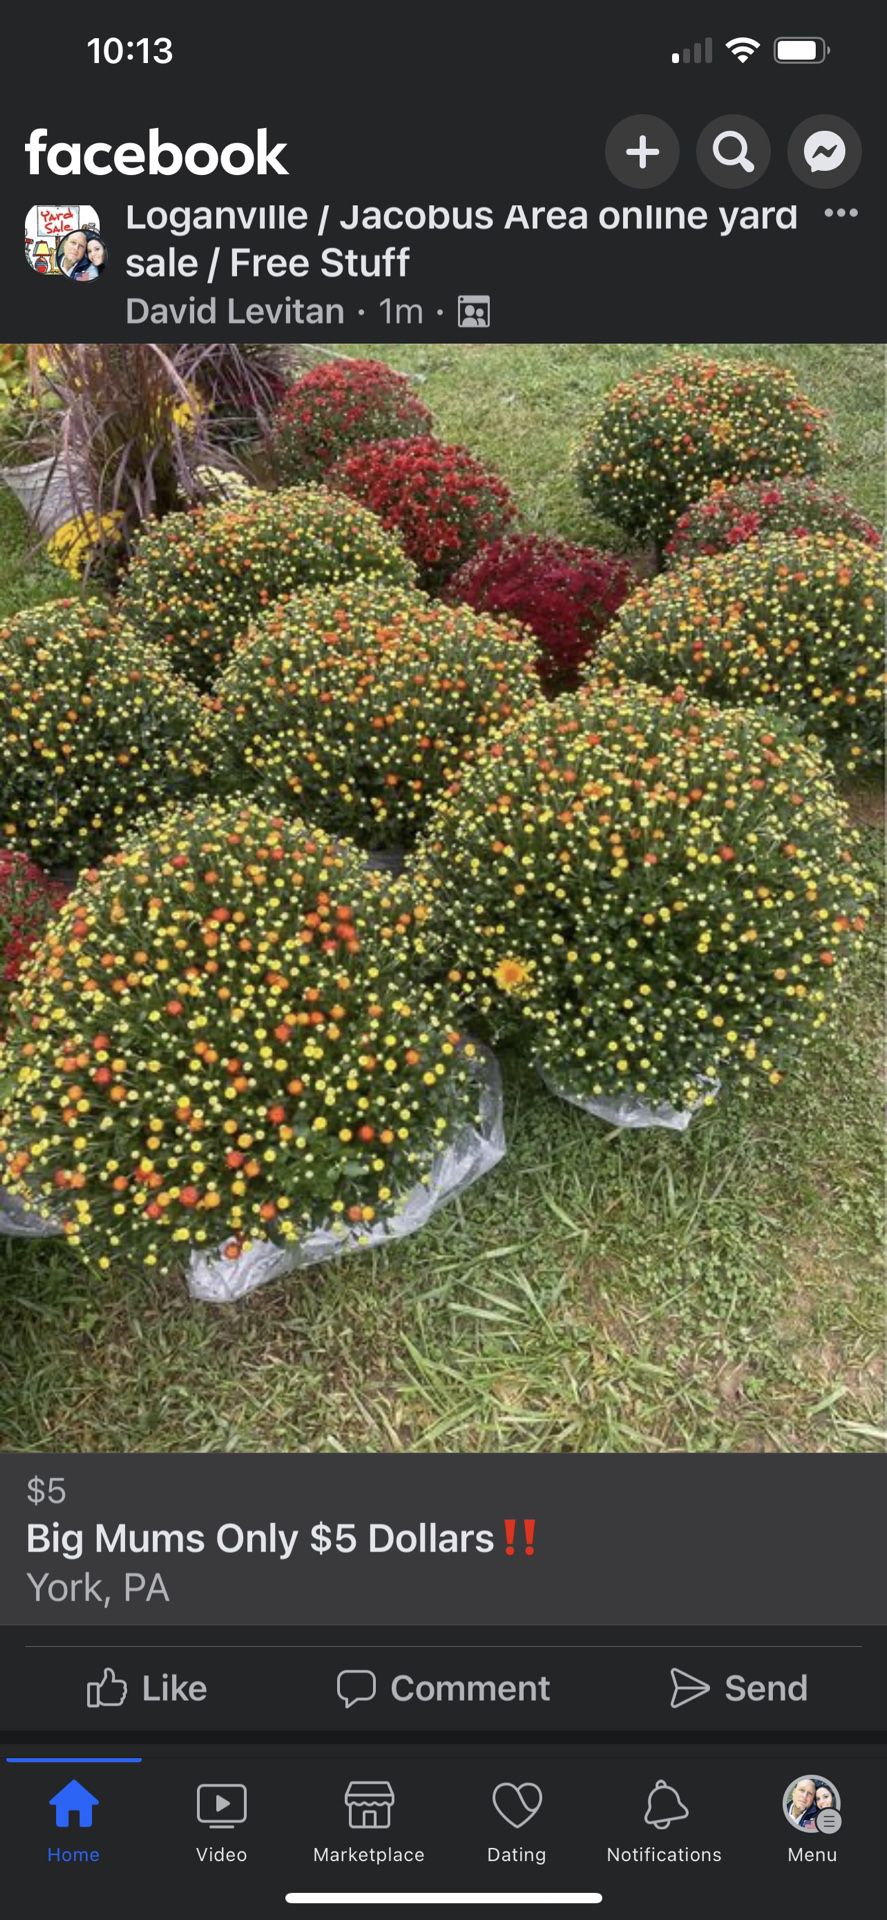 Big Mums For Only 5 Dollars